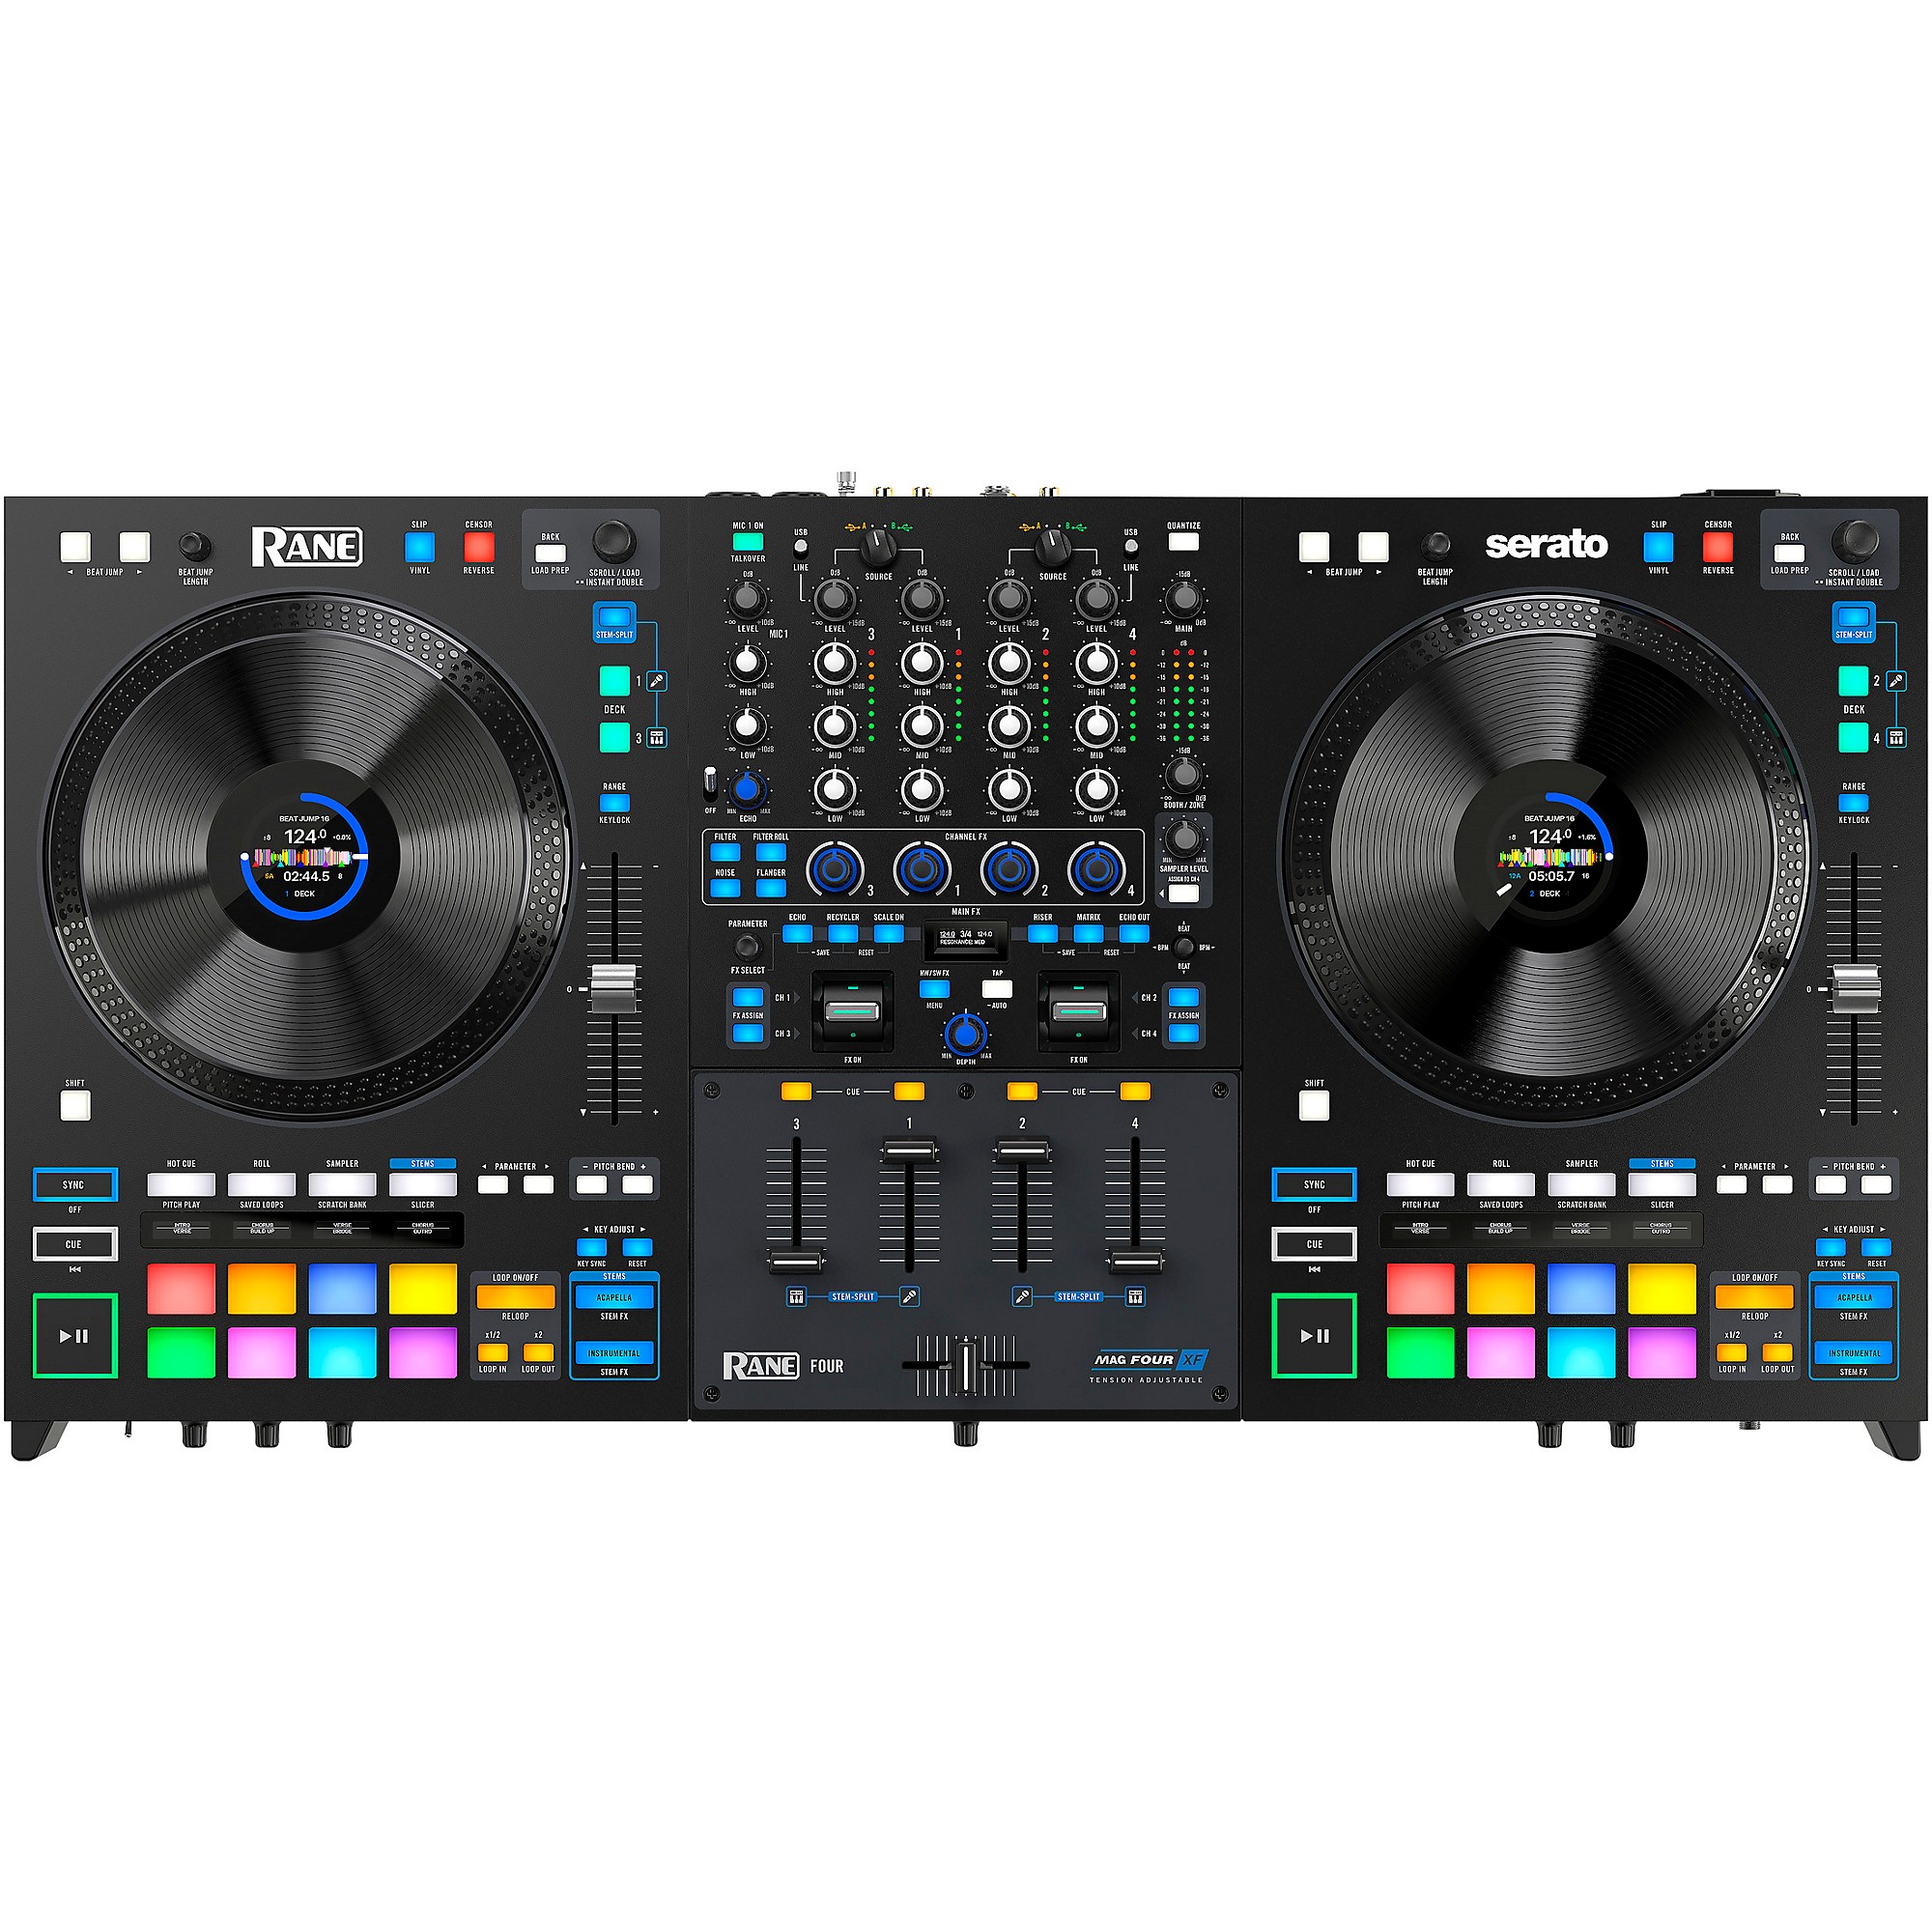 Compact and Portable Hercules DJ Controller with Air UK